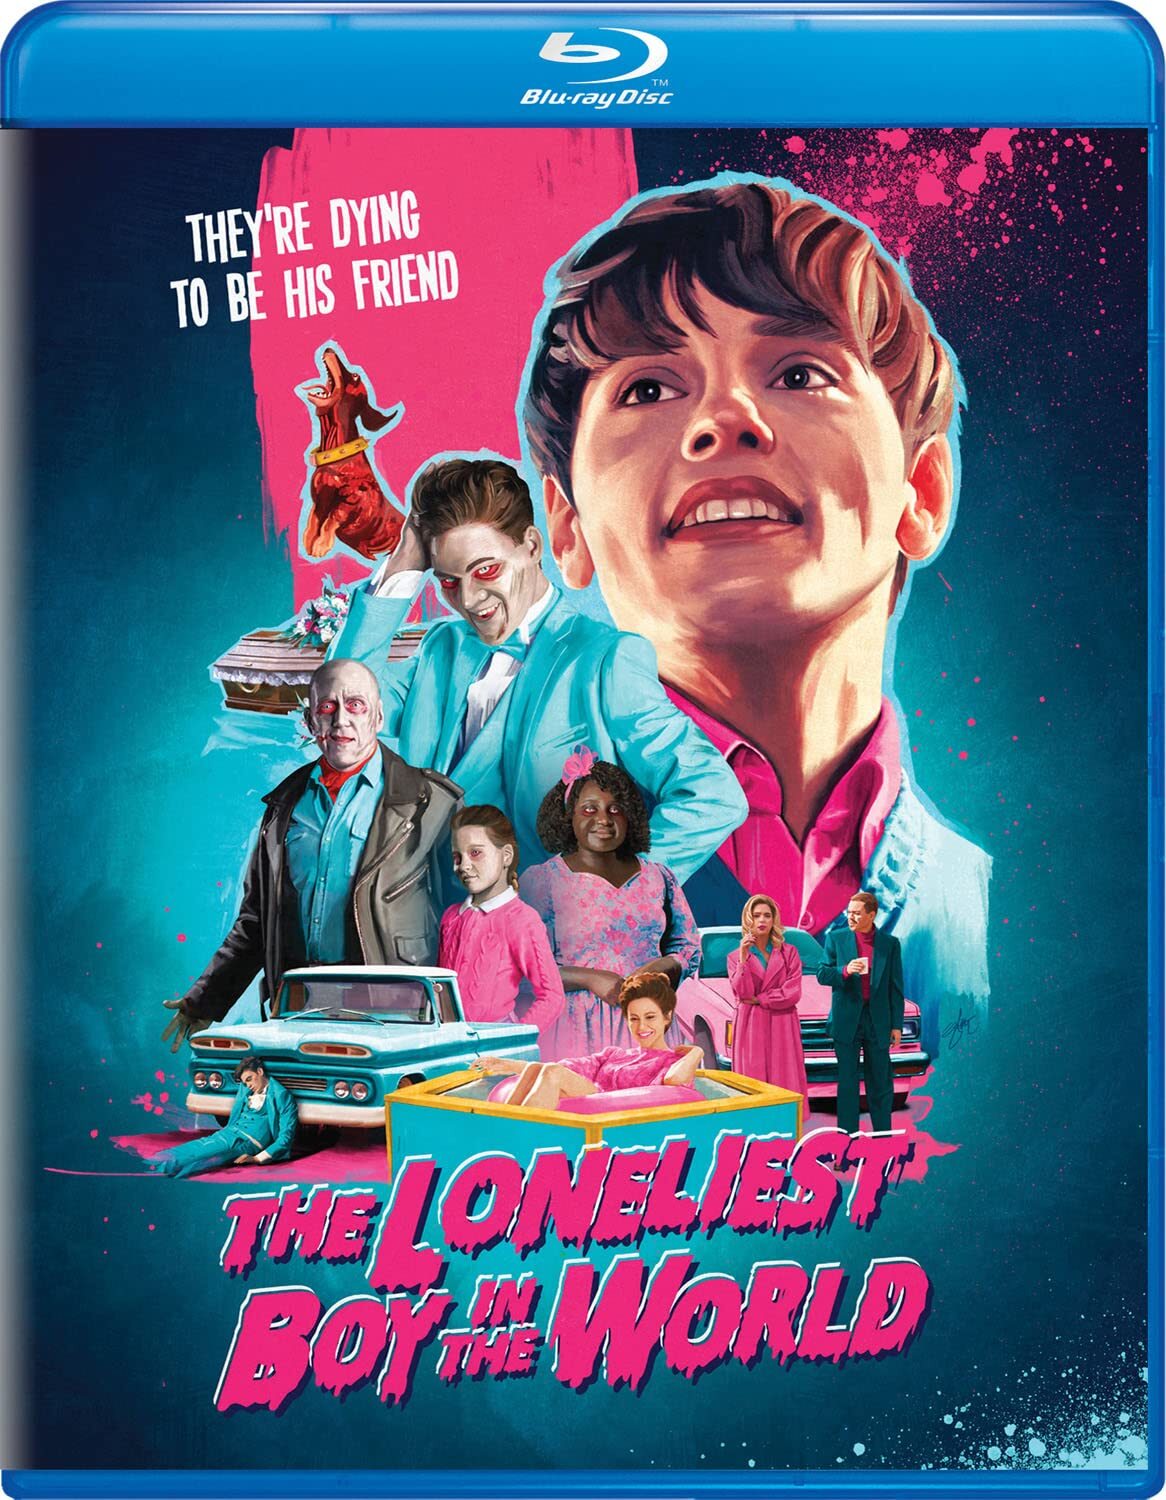 THE LONELIEST BOY IN THE WORLD BLU-RAY